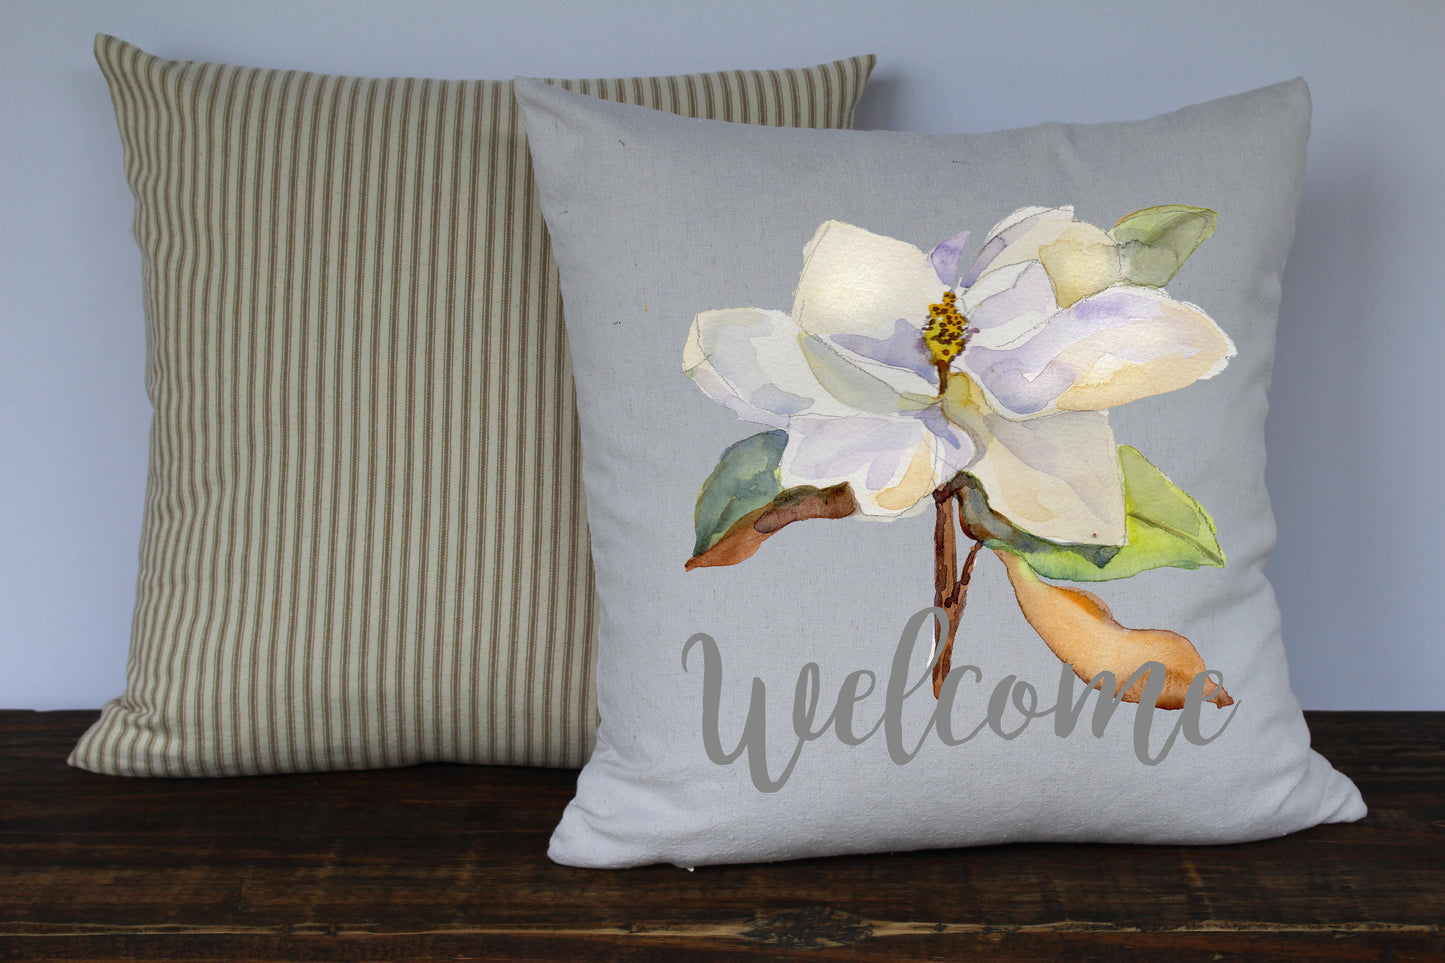 Magnolia Watercolor Welcome Canvas Pillow Cover - Returning Grace Designs